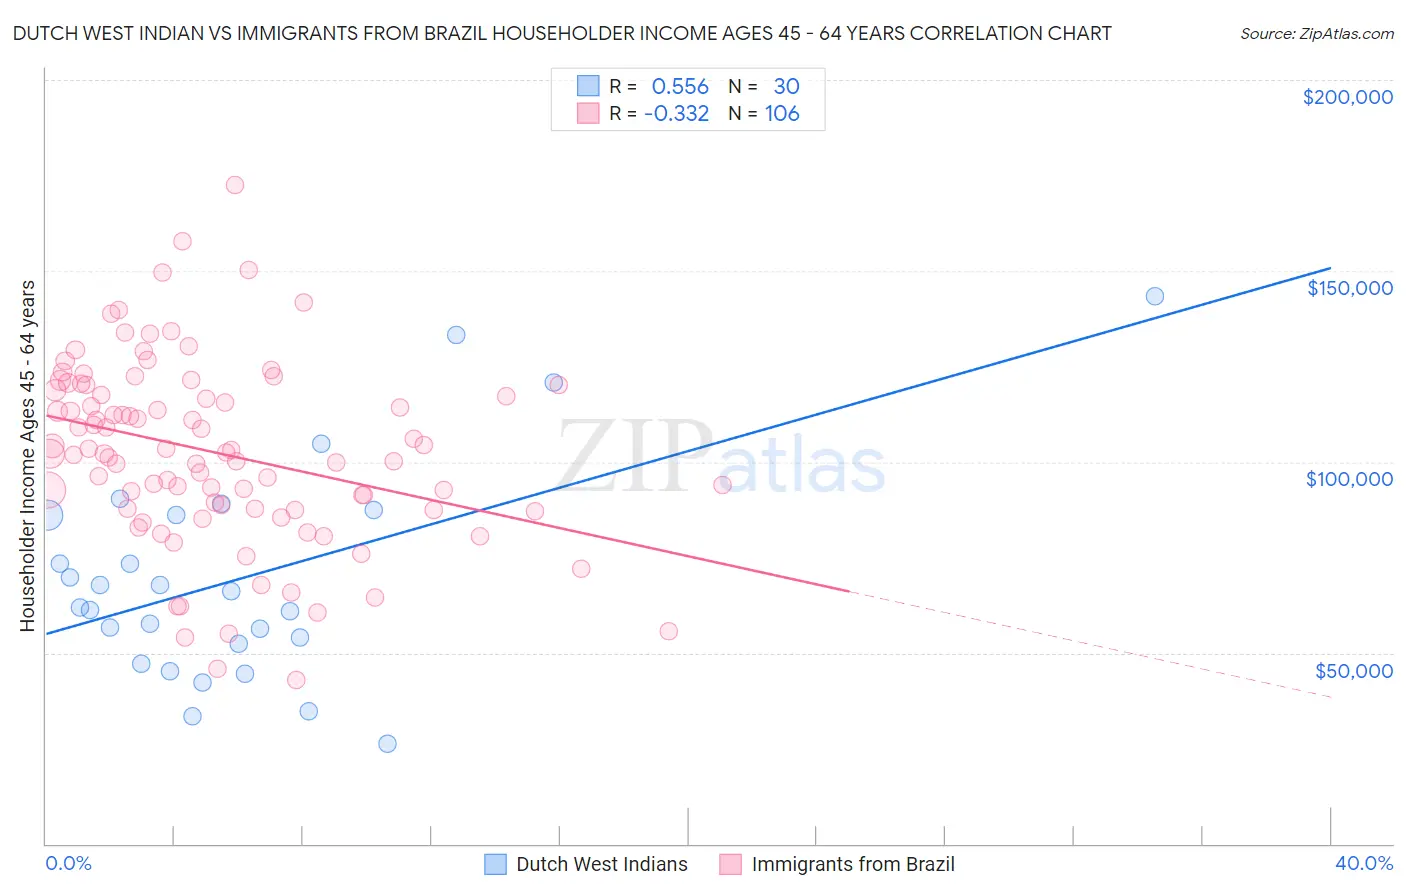 Dutch West Indian vs Immigrants from Brazil Householder Income Ages 45 - 64 years